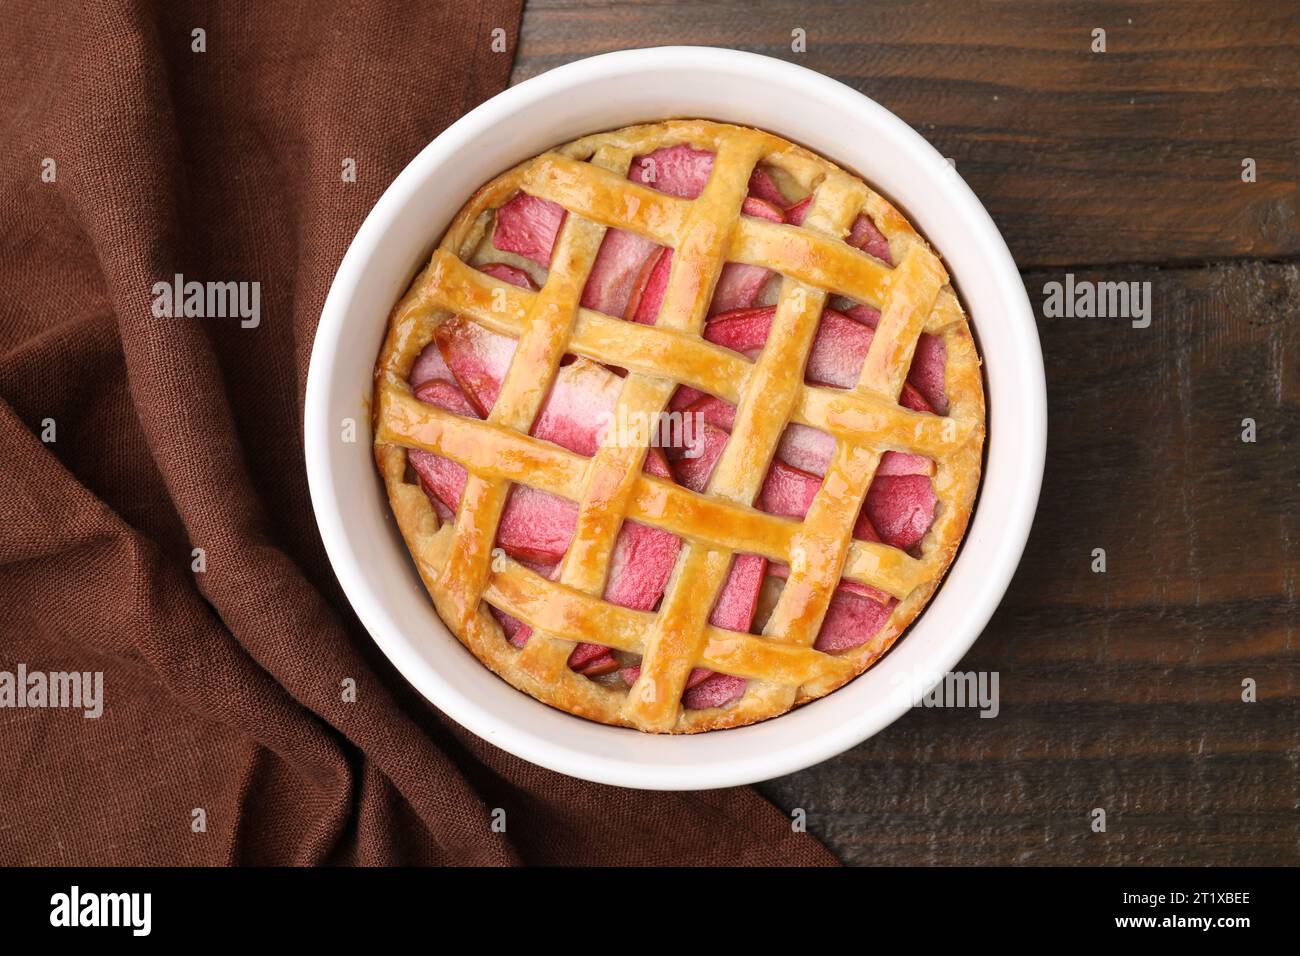 Baking dish with tasty apple pie on wooden table, top view Stock Photo